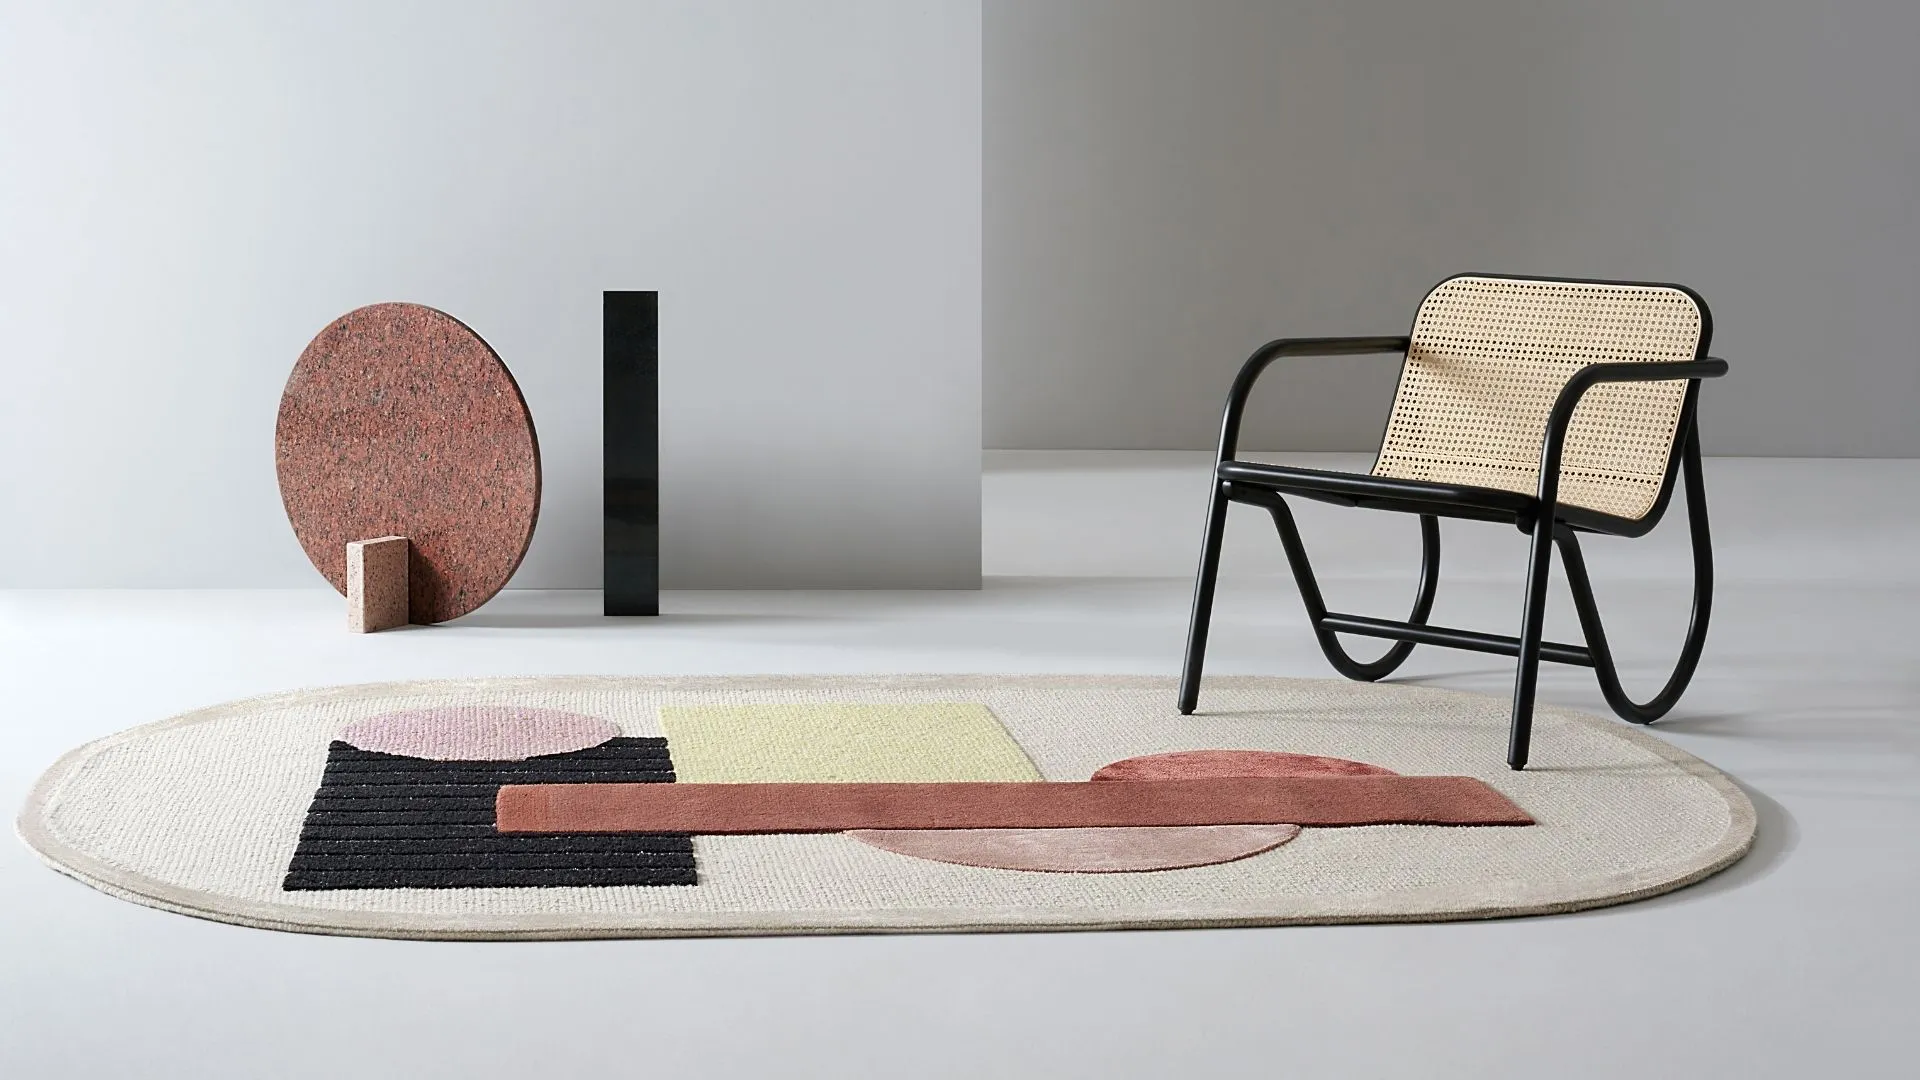 Around Colors Rugs Collection design by Paola Pastorini